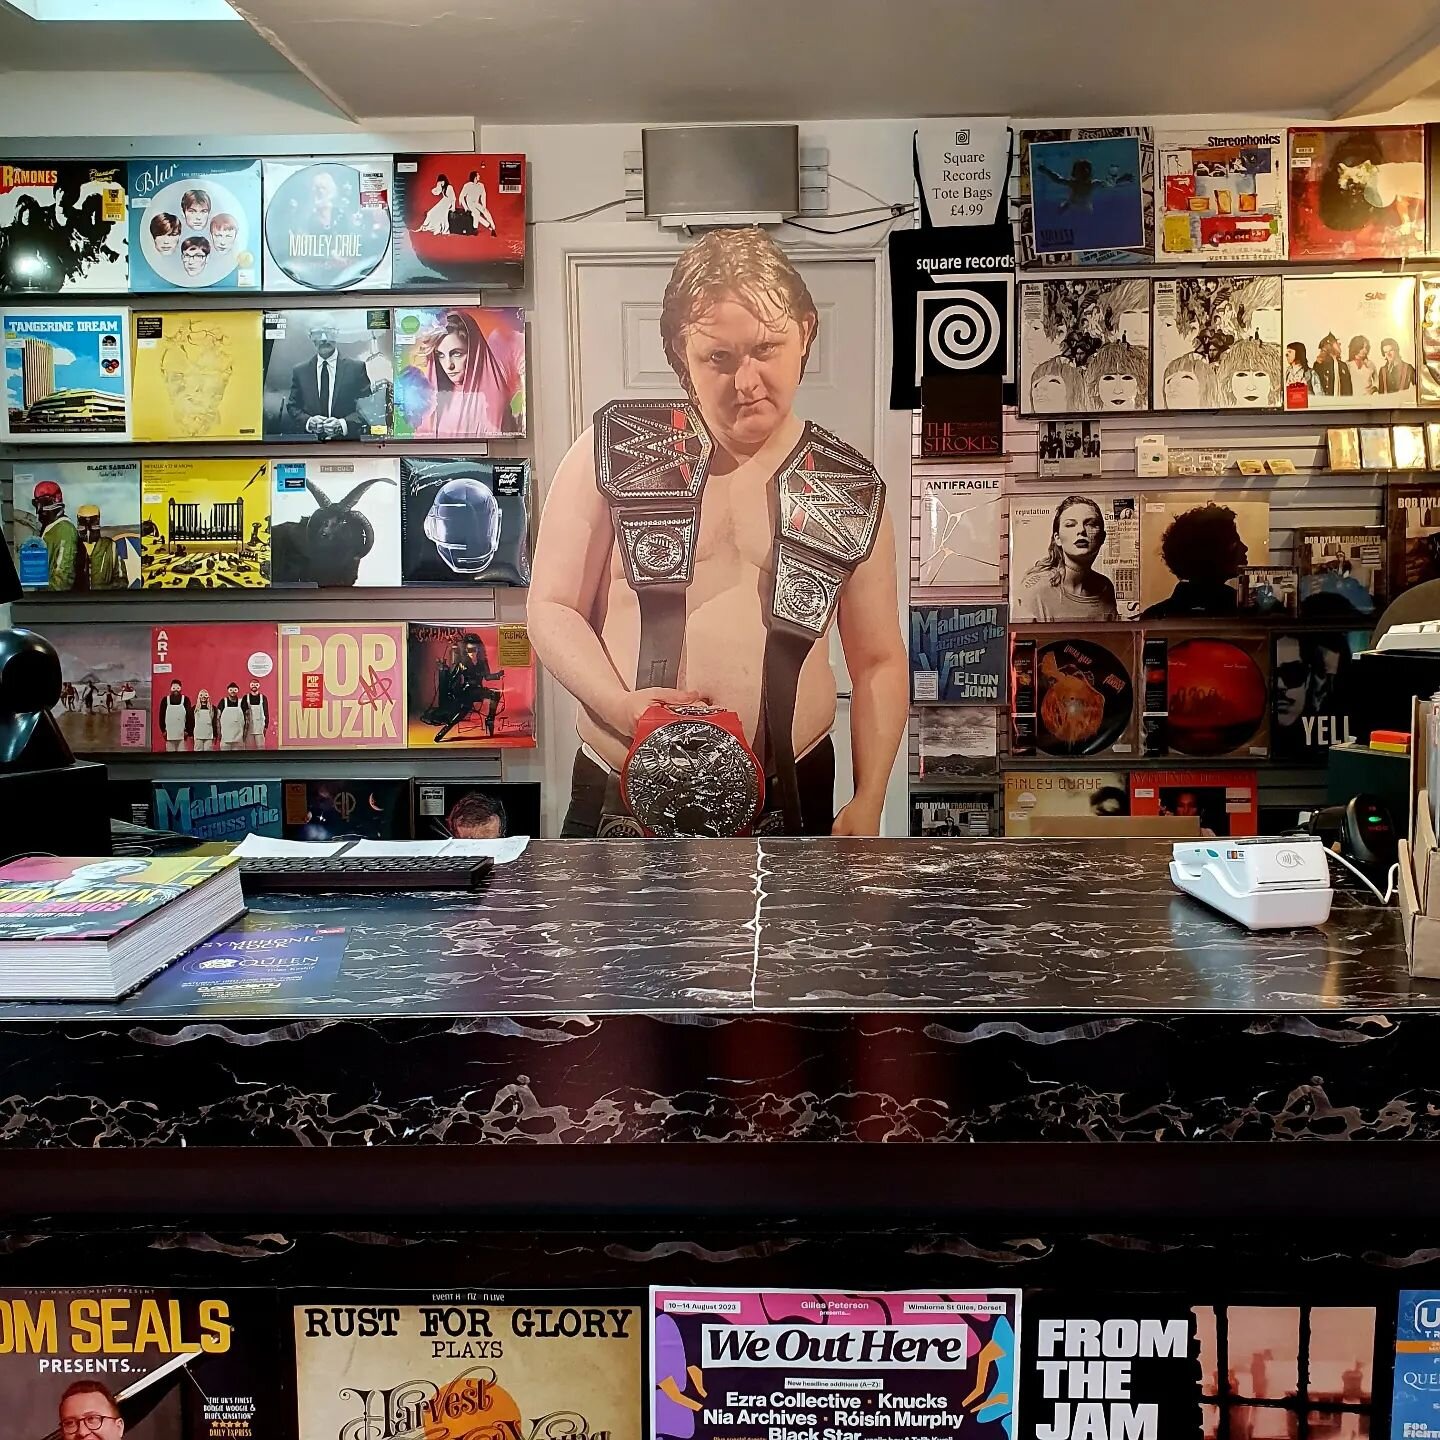 Four very different offerings in our pick of the new releases for Friday 19th May:

Lewis Capaldi: Broken By Desire To Be Heavenly Sent - the singer-songwriter and star of Netflix's second studio album. We have it on picture disc, black vinyl with a 